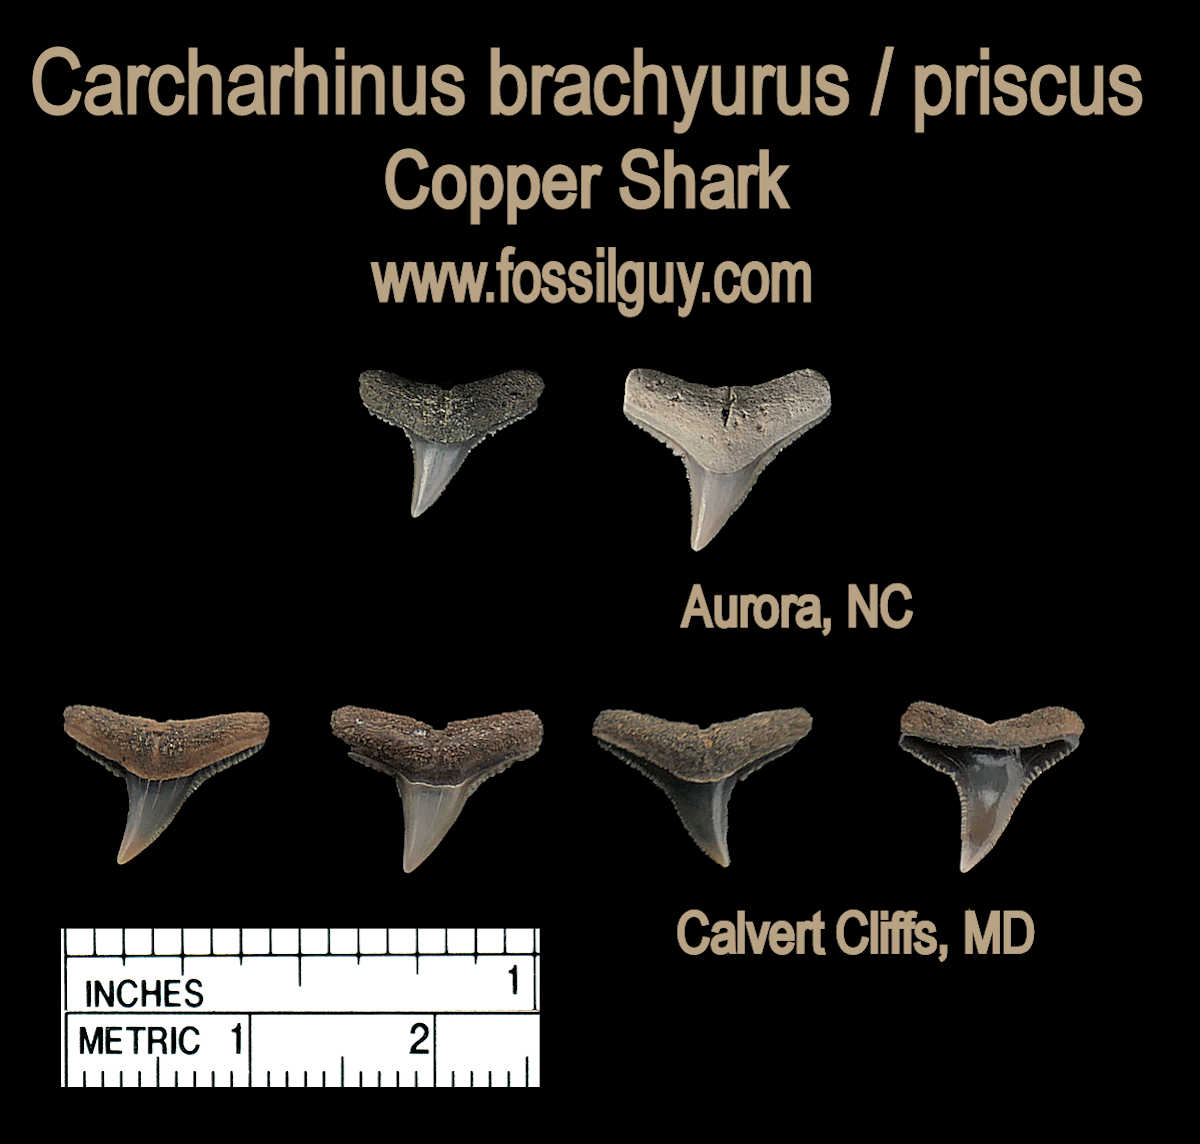 Carcharhinus brachyurus and/or priscus fossil shark teeth from the Clavert Cliffs of MD and Aurora, NC.